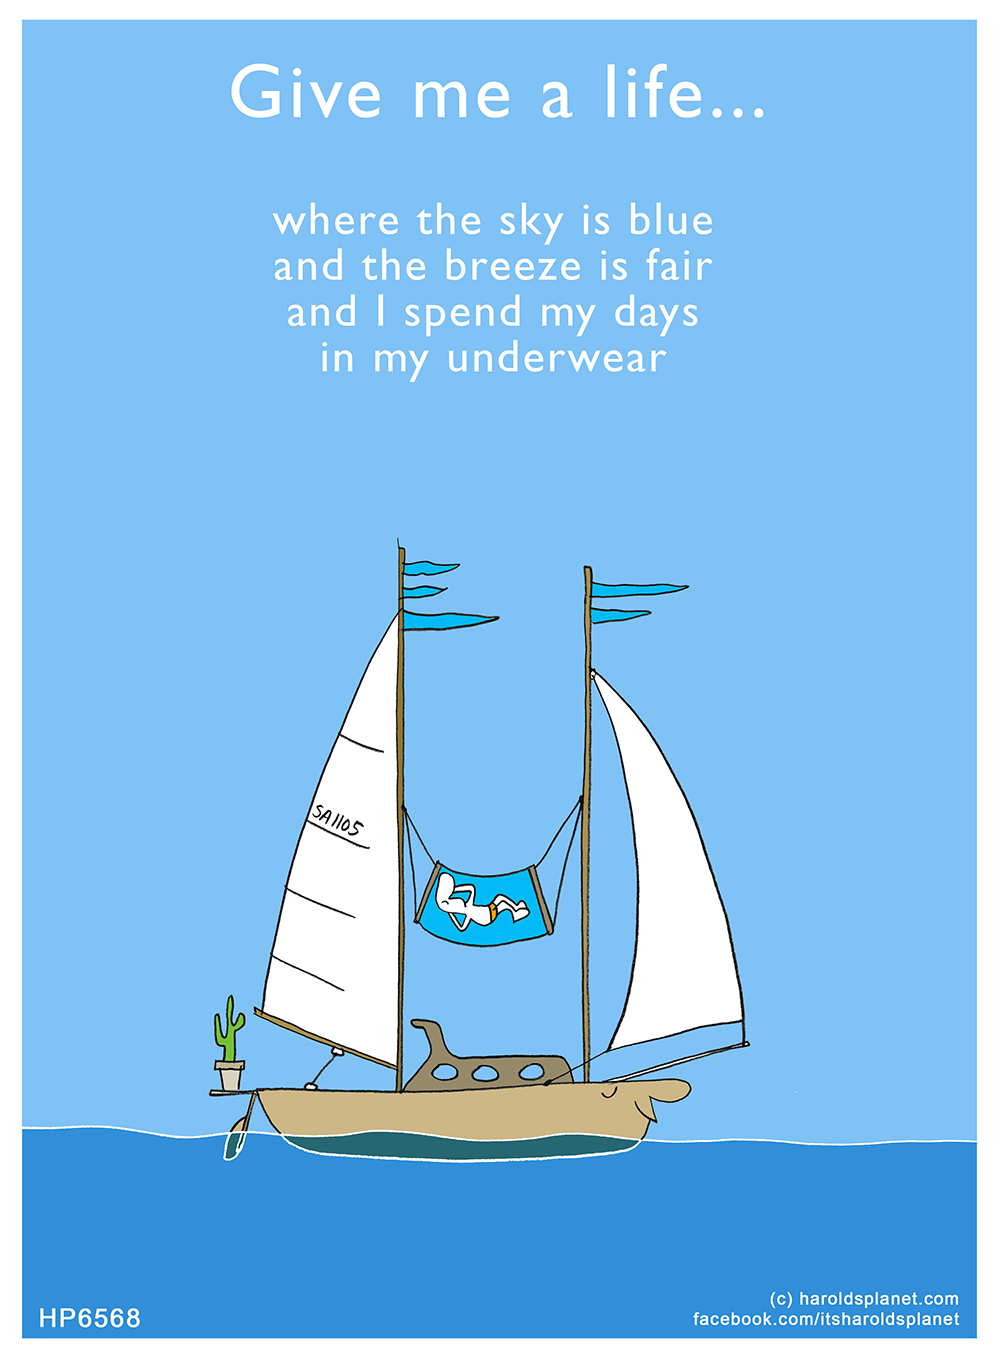 Harold's Planet: Take me to a place where the sky is blue and the breeze is fair and I spend my days in my underwear